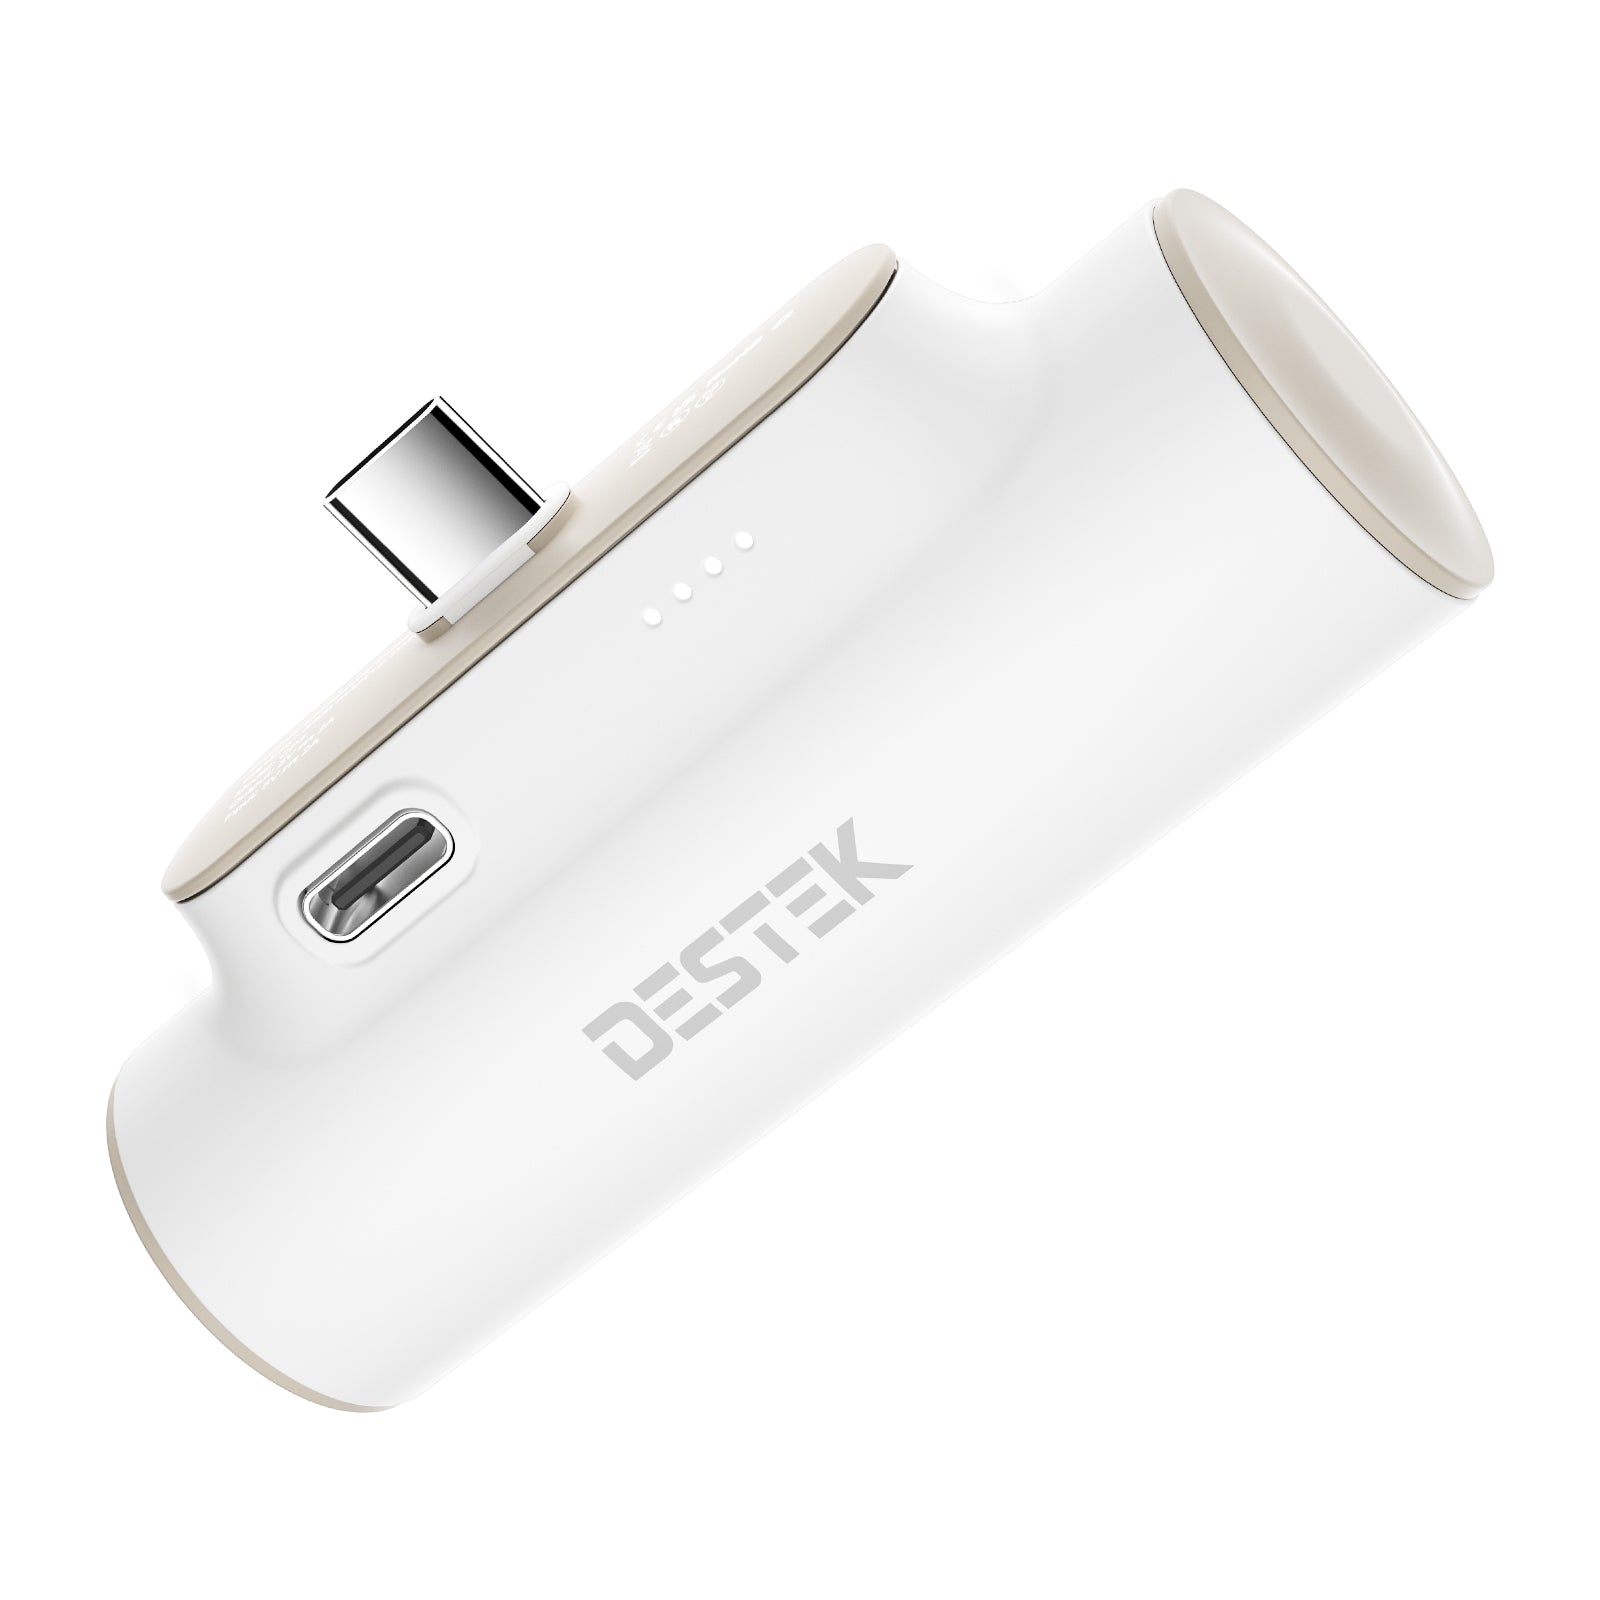 DESTEK Fast Charging Power Bank for Quest 1/2 Extra 2 Hours Playtime